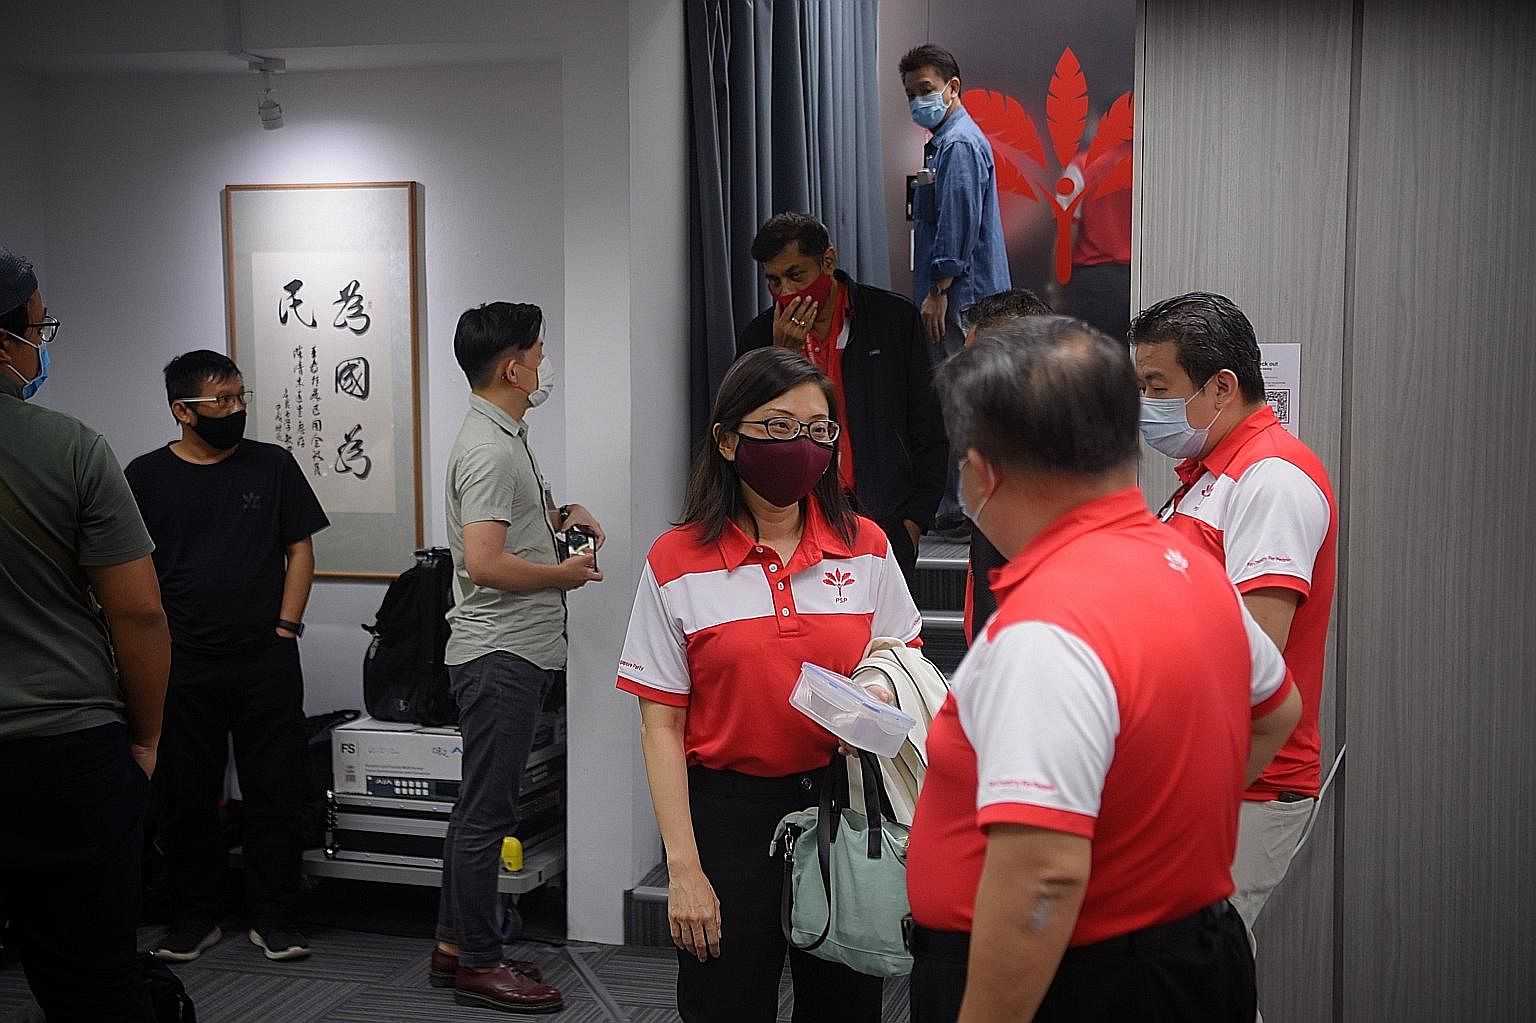 Progress Singapore Party's West Coast GRC candidate Hazel Poa arriving at the party headquarters early this morning. PSP's A team lost the contest in the GRC with 48.31 per cent of the votes. ST PHOTO: MARK CHEONG